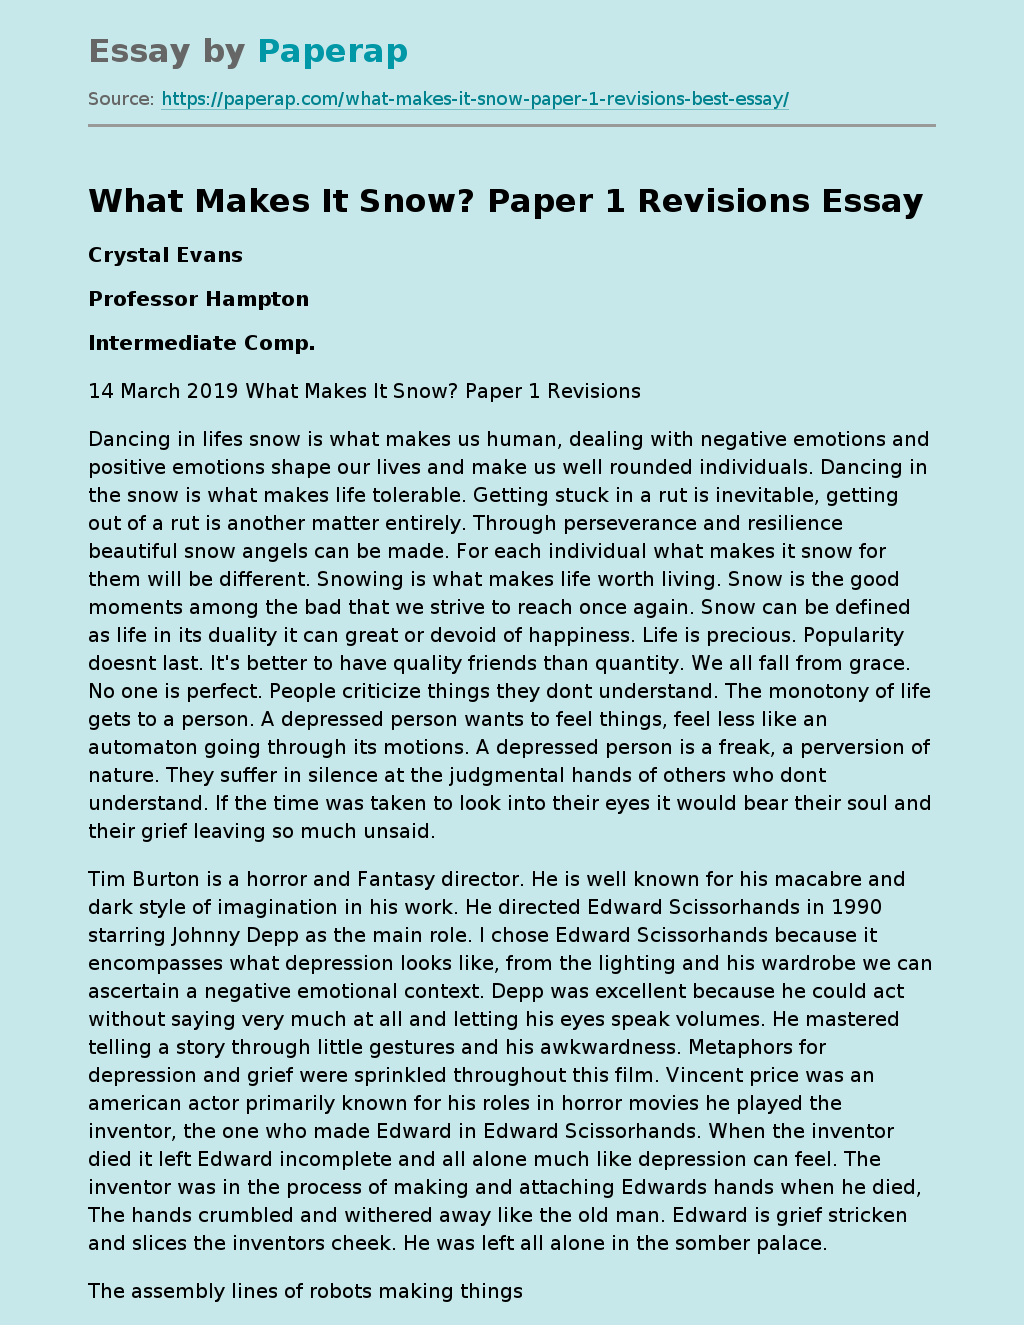 What Makes It Snow? Paper 1 Revisions